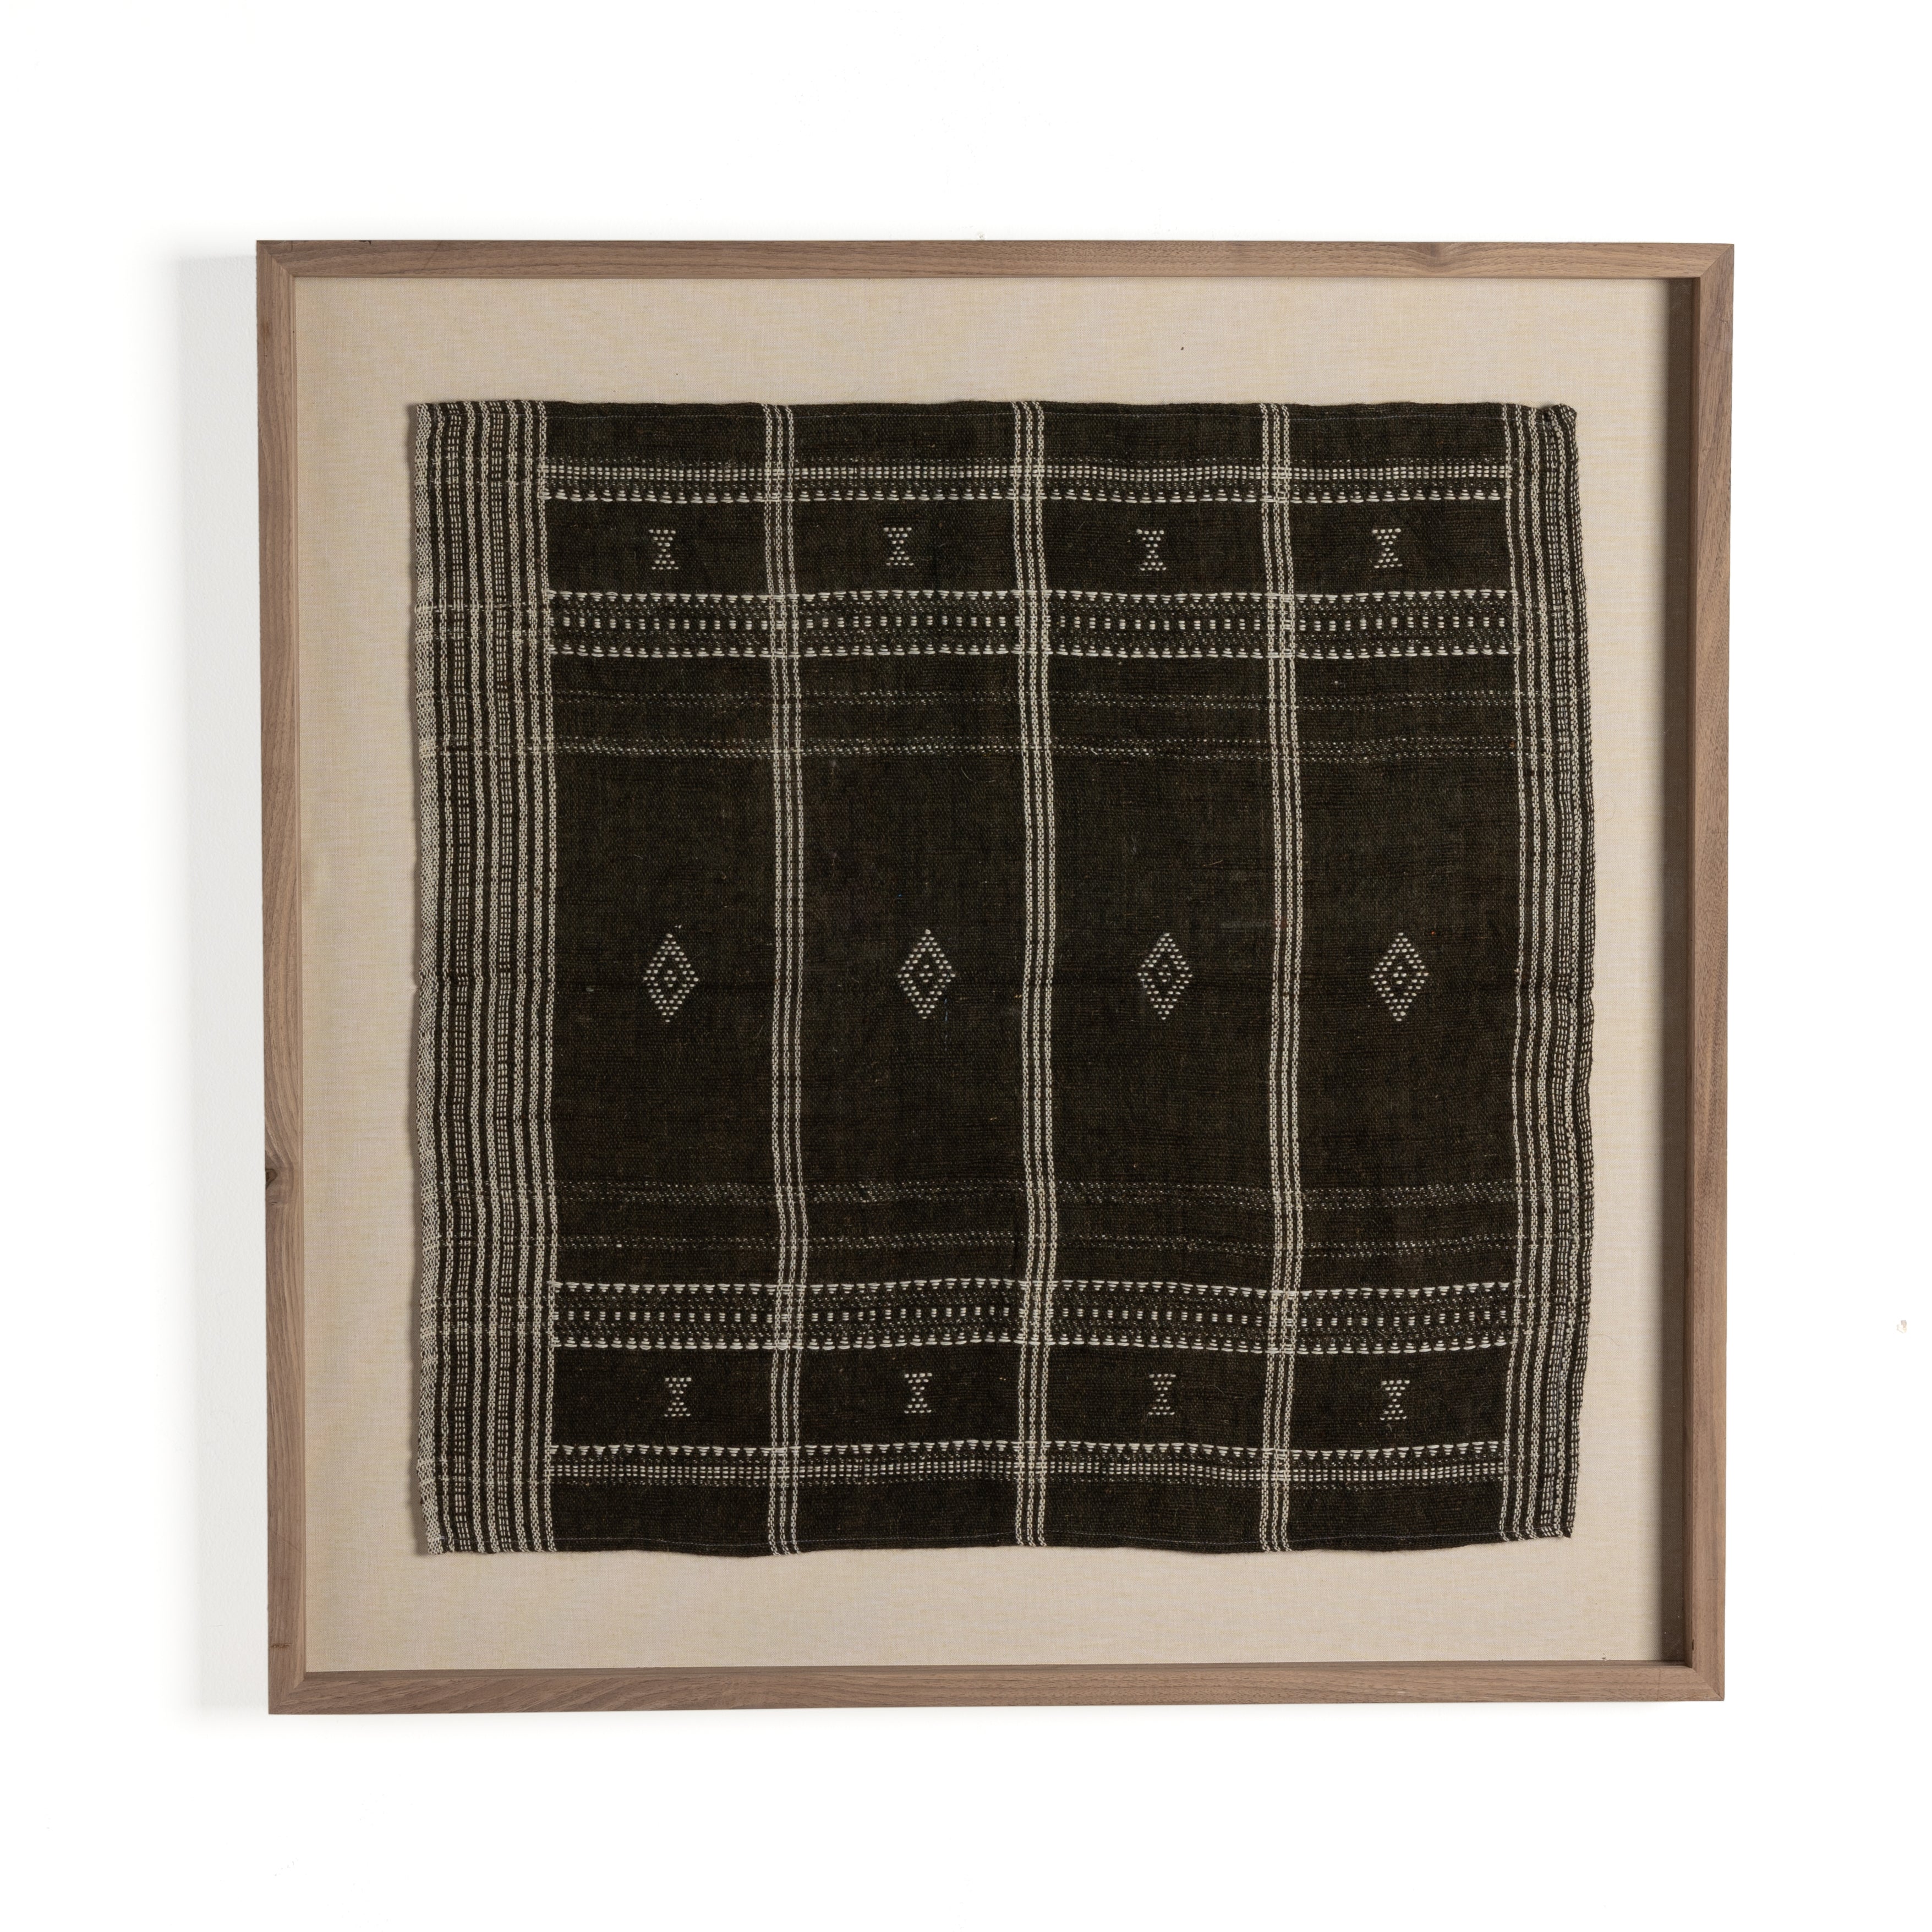 A 500-year-old tradition comes to life on this 100% wool, handwoven textile. Crafted on a traditional frame loom following a tradition created by the Vankars of the Bhujodi village in India, a process that can take up to two days to complete. Finished with fringe tassels on both ends. If not currently in stock, this piece ships within three weeks. Amethyst Home provides interior design, new home construction design consulting, vintage area rugs, and lighting in the Salt Lake City metro area.